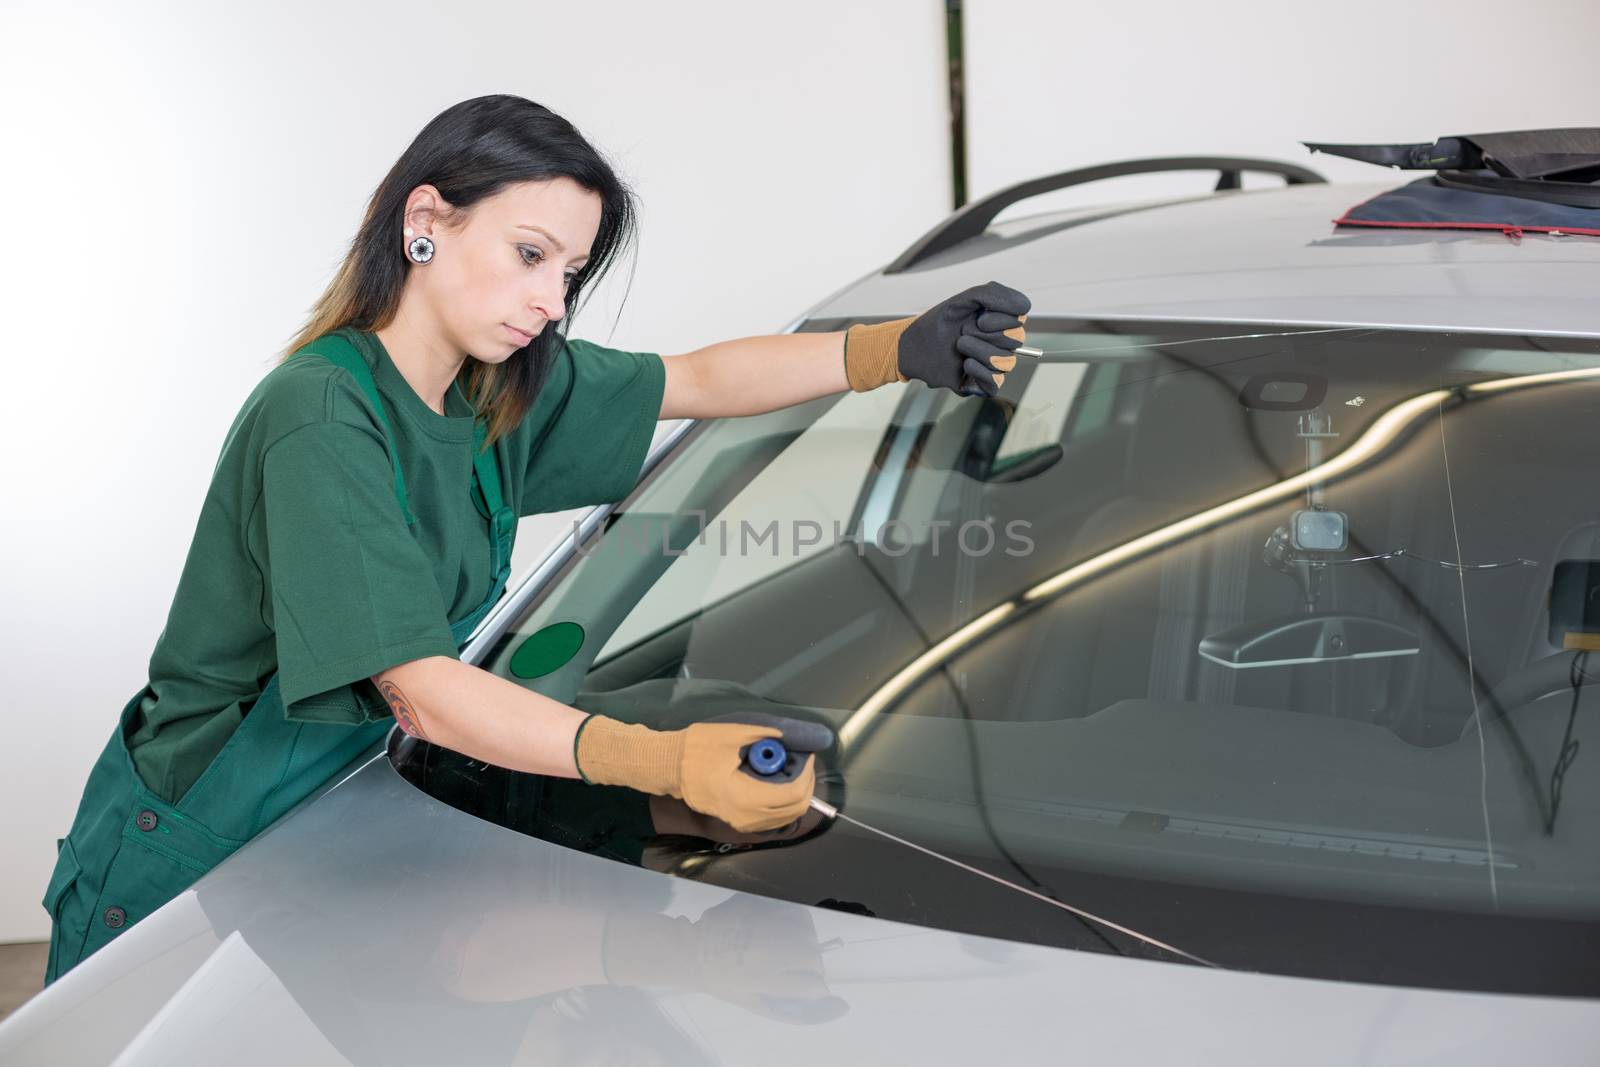 Glazier cutting adhesive of windscreen with a wire to replace windshield